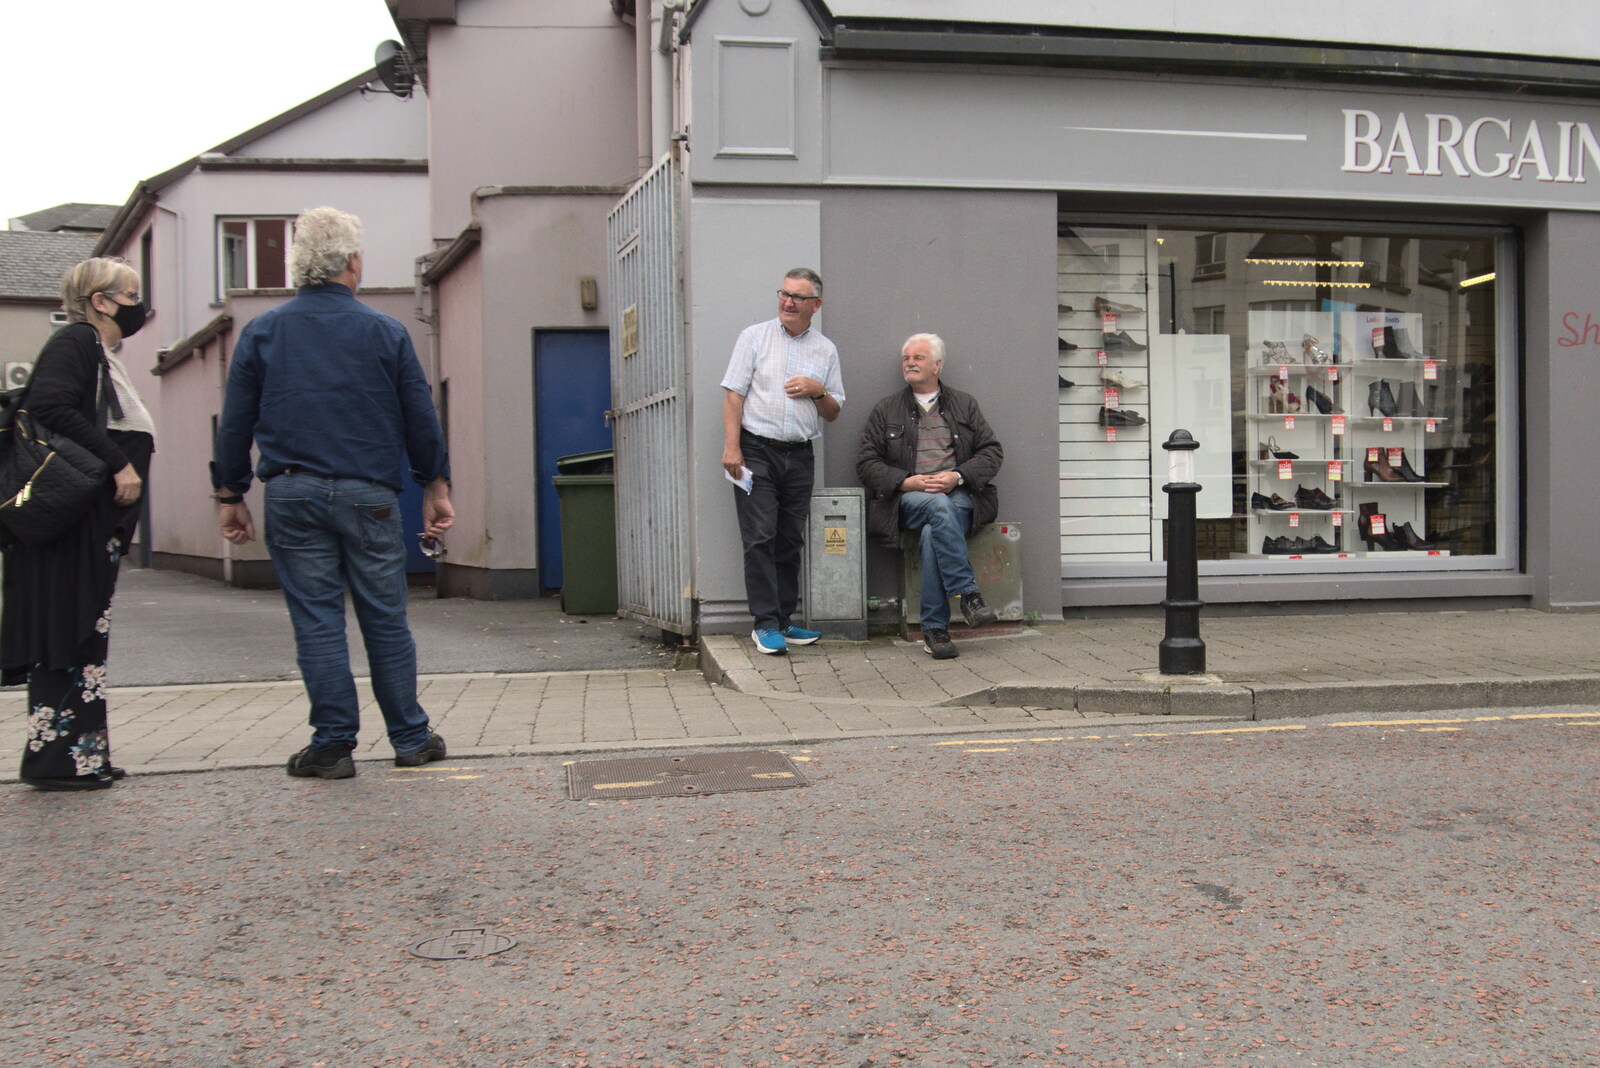 A Trip to Manorhamilton, County Leitrim, Ireland - 11th August 2021: A couple of geezers chat